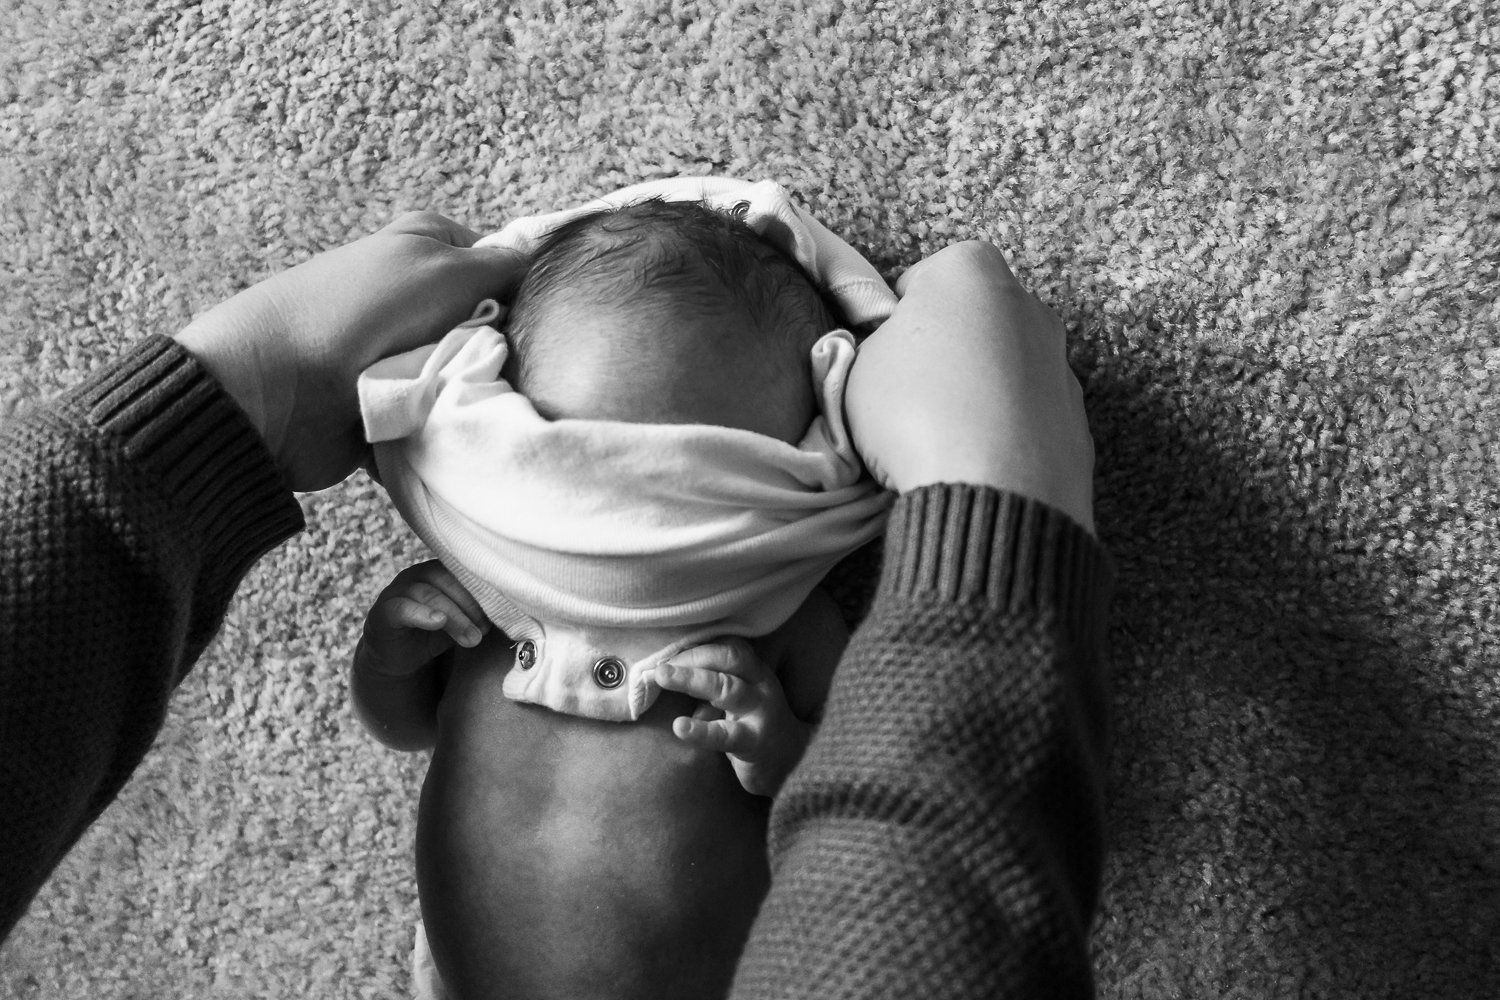  black and white image of a newborn having his clothing changed on the floor in his bedroom during his newborn photography session.  